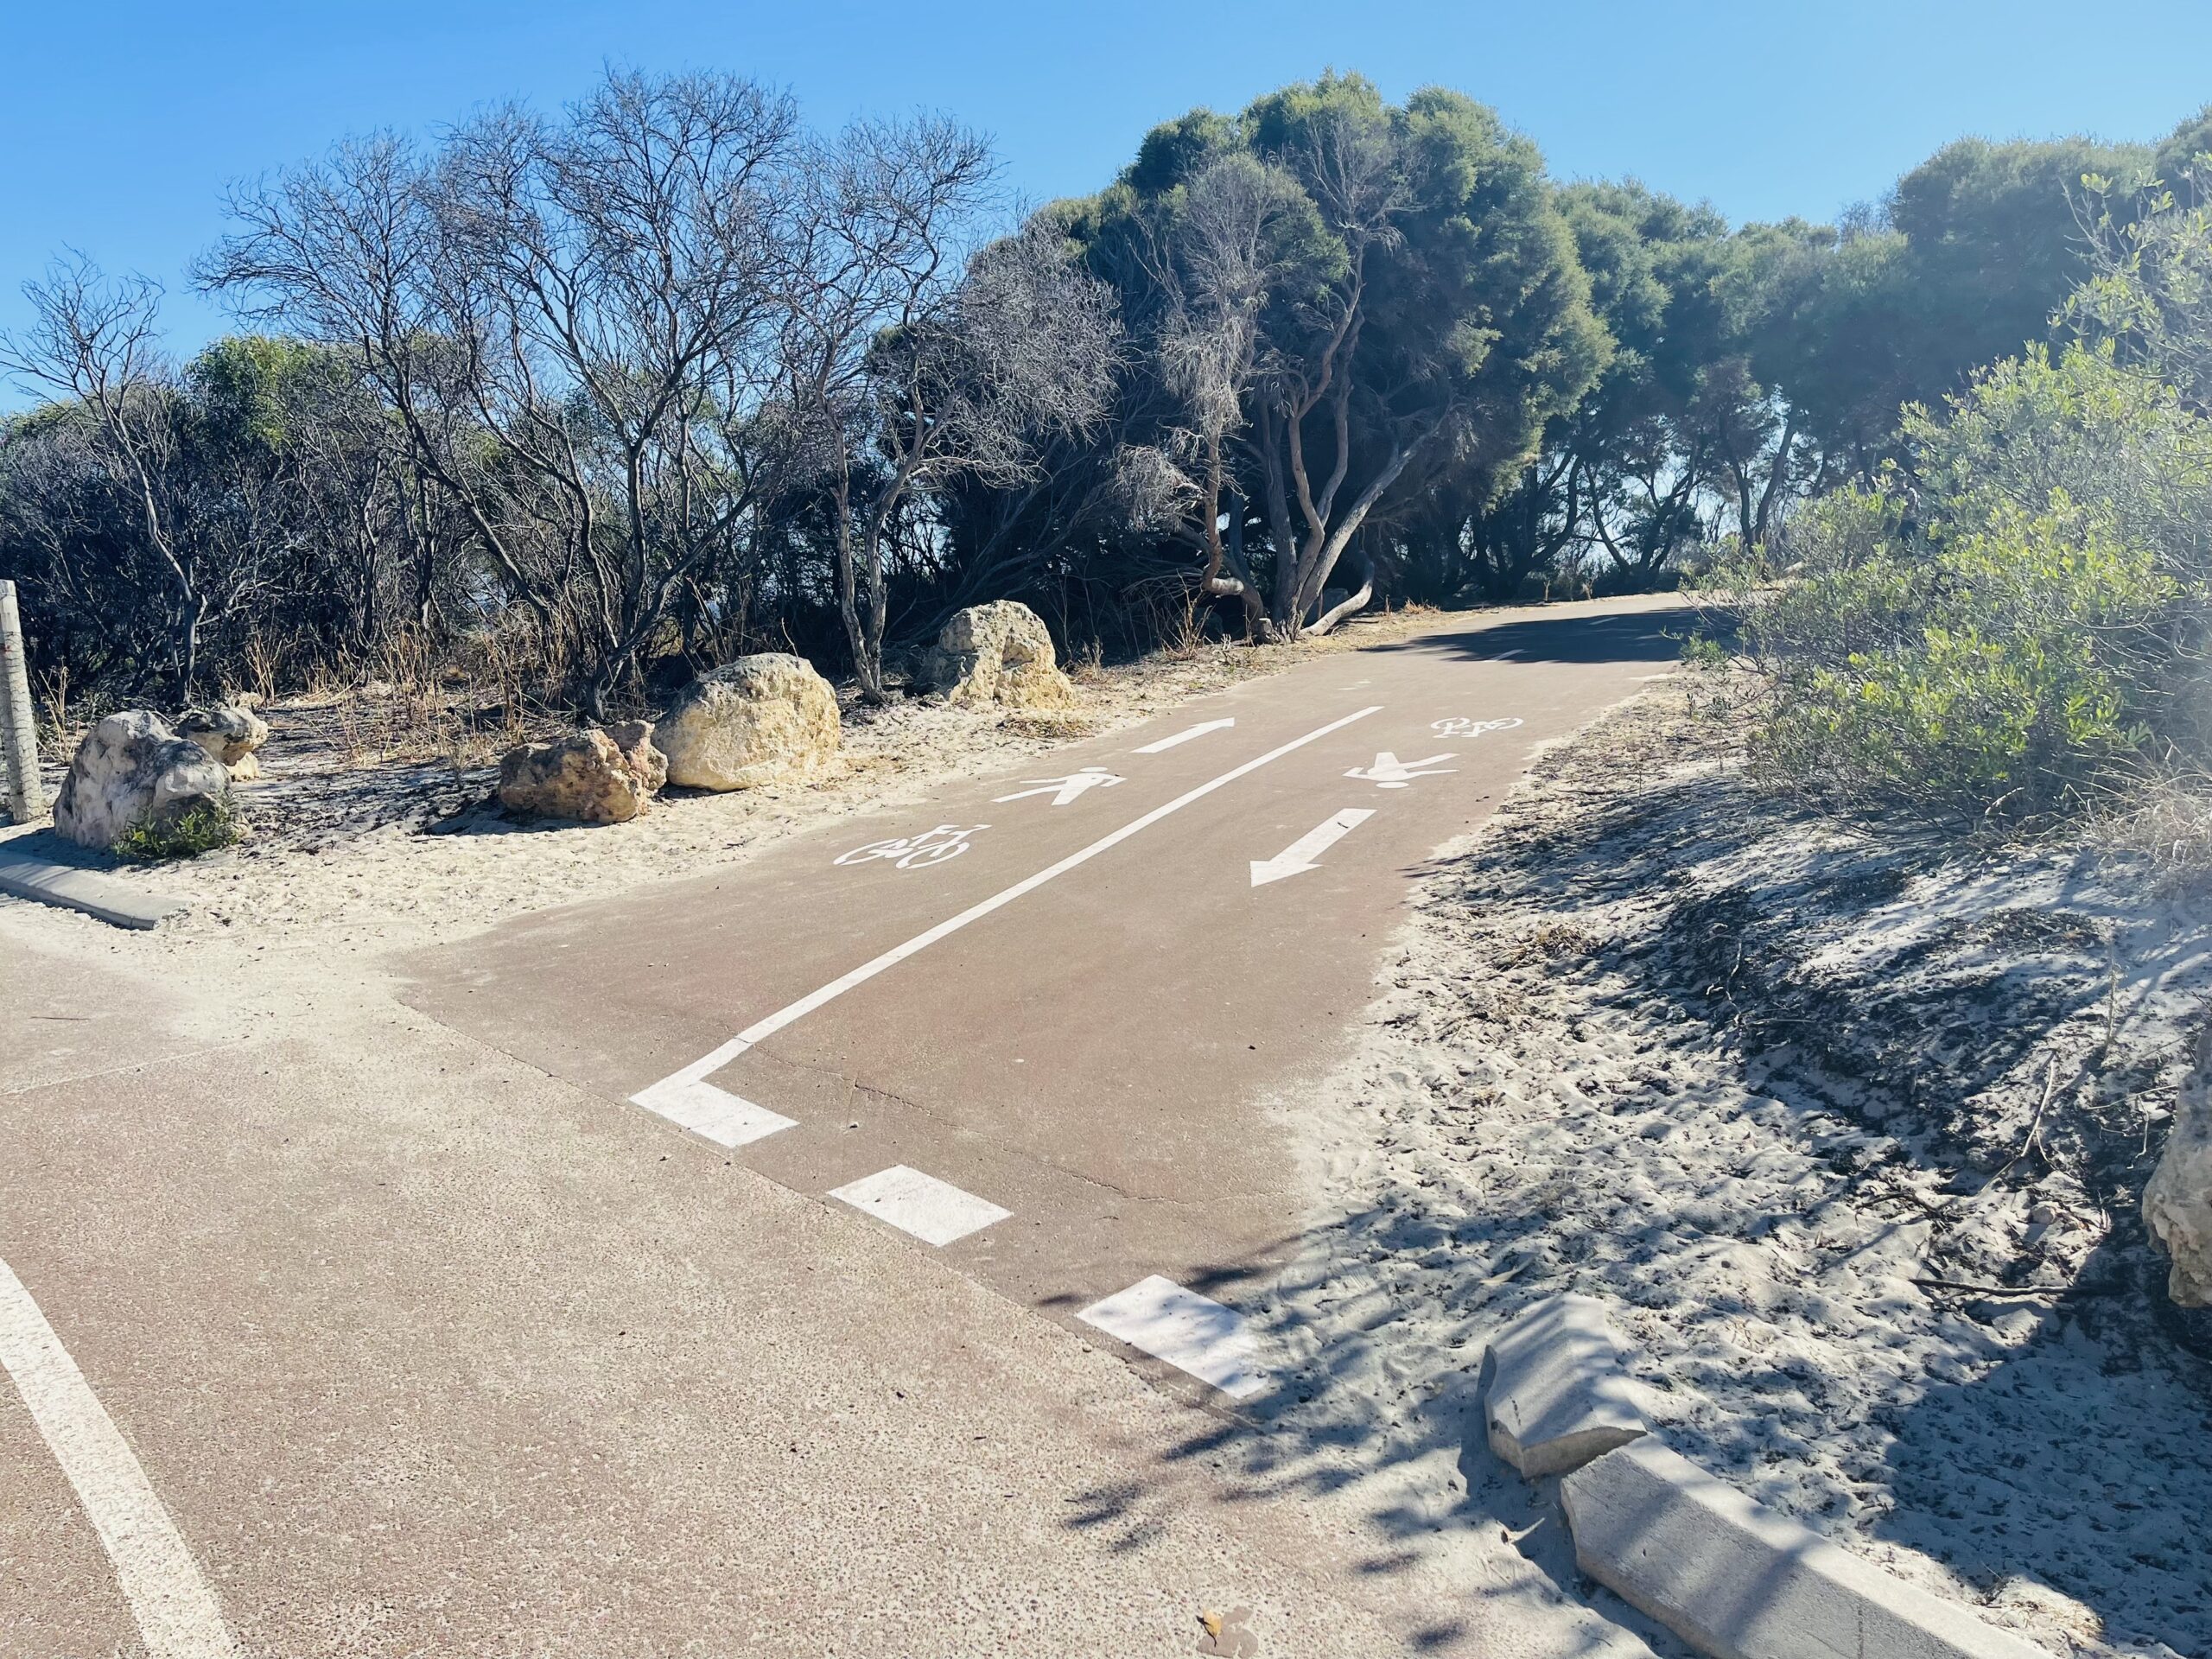 This photograph shows one of many dual use pathways at John Graham Reserve. The pathway is marked with directional lines and symbols to help users share the pathway with others. The concrete path is red in colour with white lines and symbols and is surrounded by white sand, rocks and trees with green leaves. The sky is blue and it’s a sunny day with no clouds in the sky.